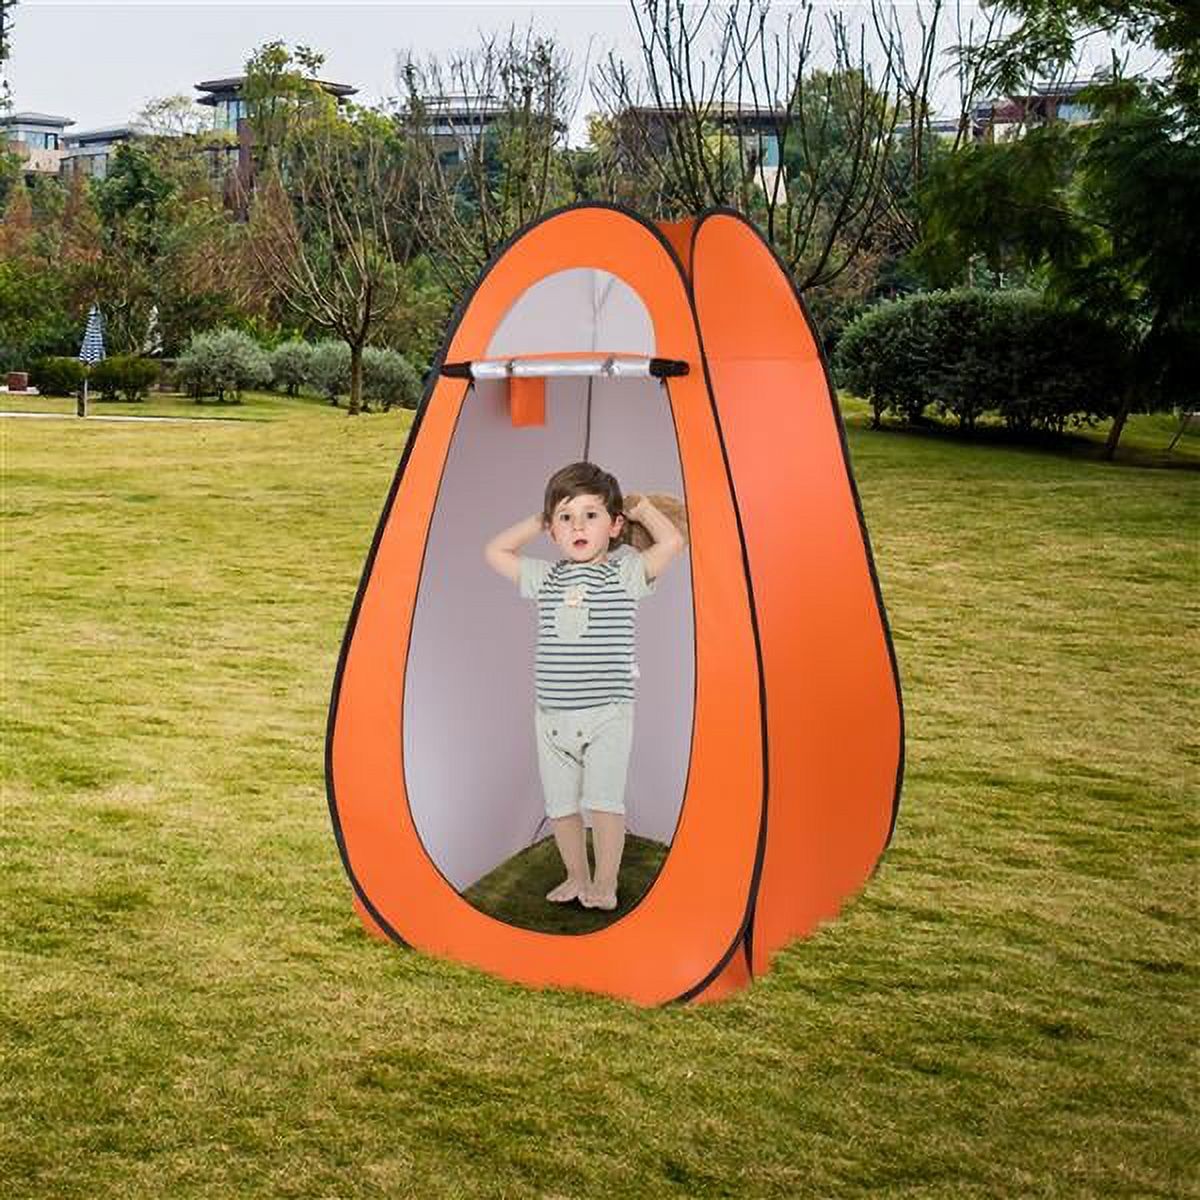 Goorabbit Shower Tents For Camping Pop-Up Privacy TentPortable Shower Tent Outdoor Camp Bathroom Changing Dressing Room Instant Privacy Shelters for Hiking Beach Picnic Fishing Potty - image 4 of 11